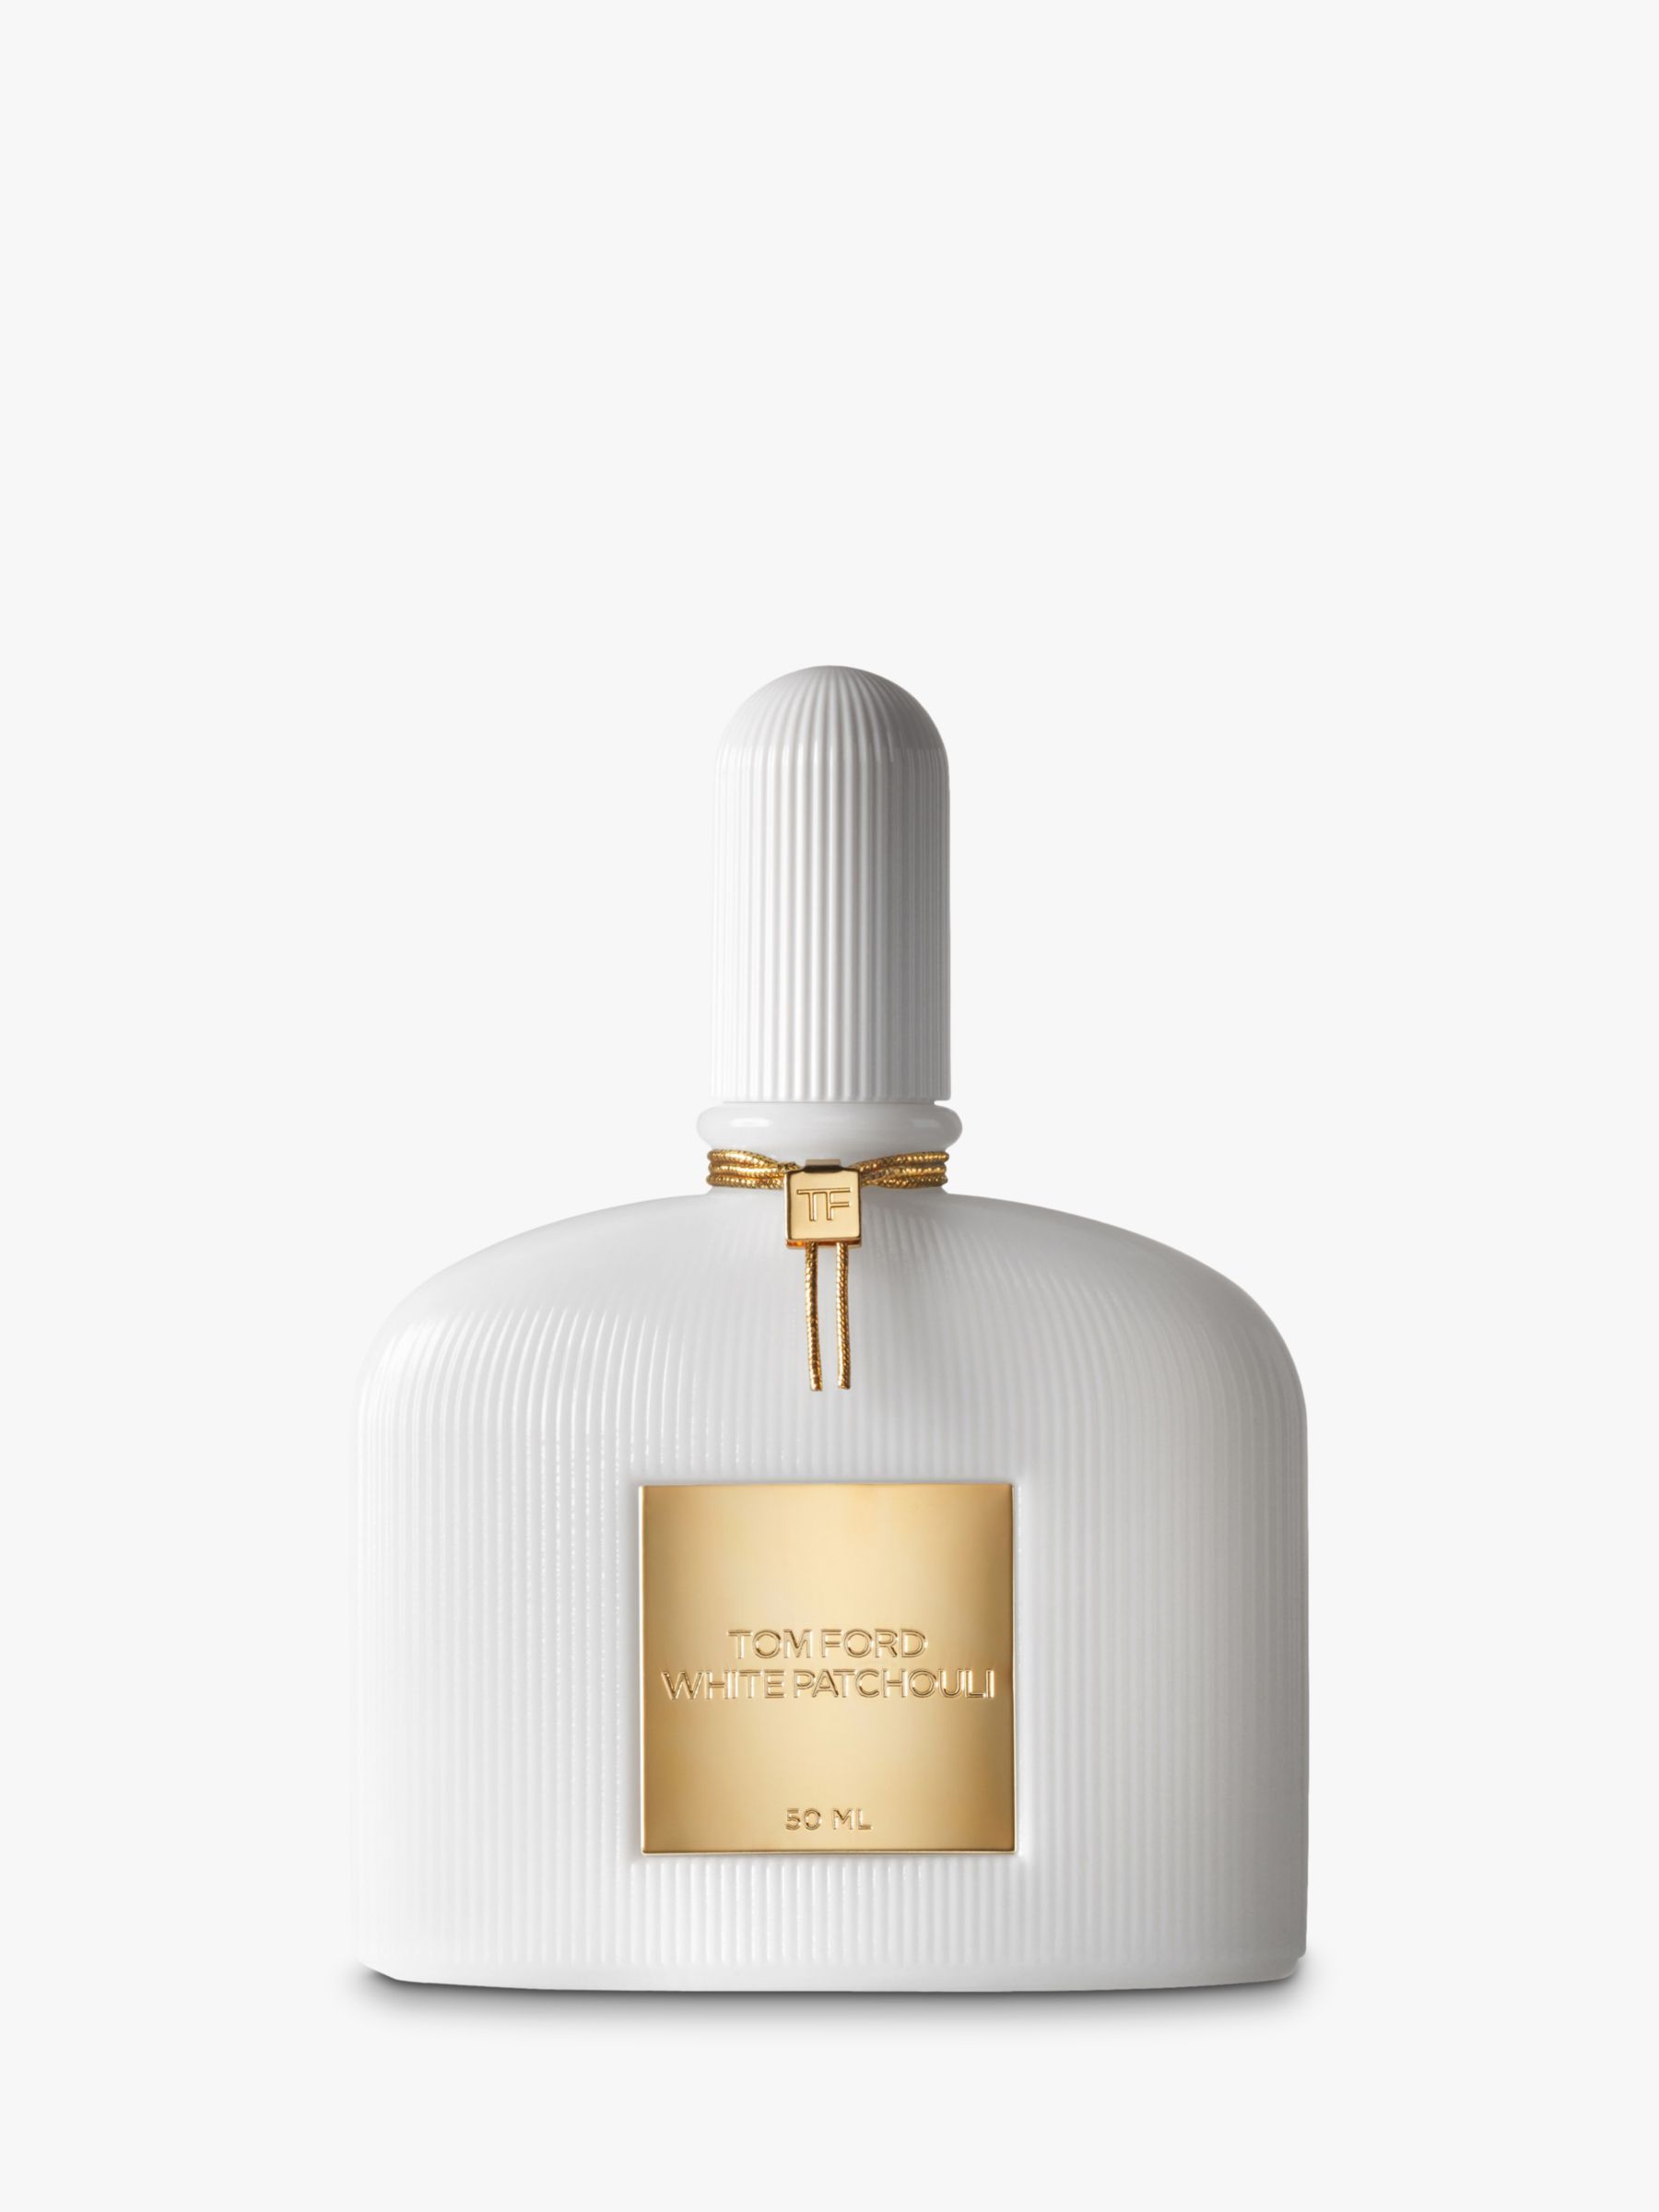 tom ford white patchouli mens